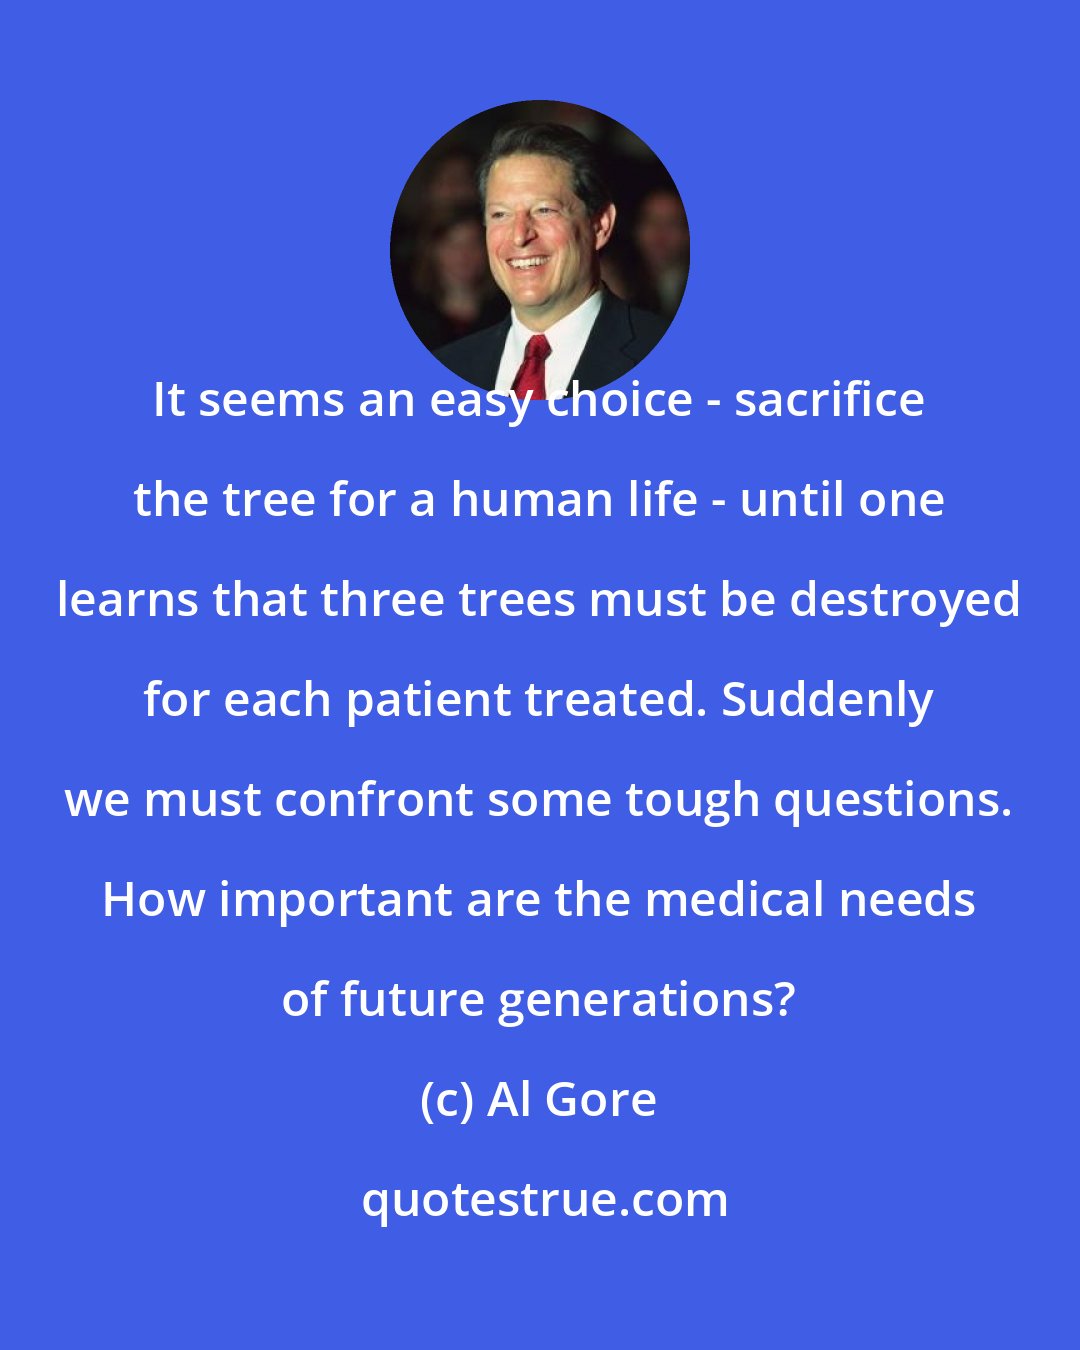 Al Gore: It seems an easy choice - sacrifice the tree for a human life - until one learns that three trees must be destroyed for each patient treated. Suddenly we must confront some tough questions. How important are the medical needs of future generations?